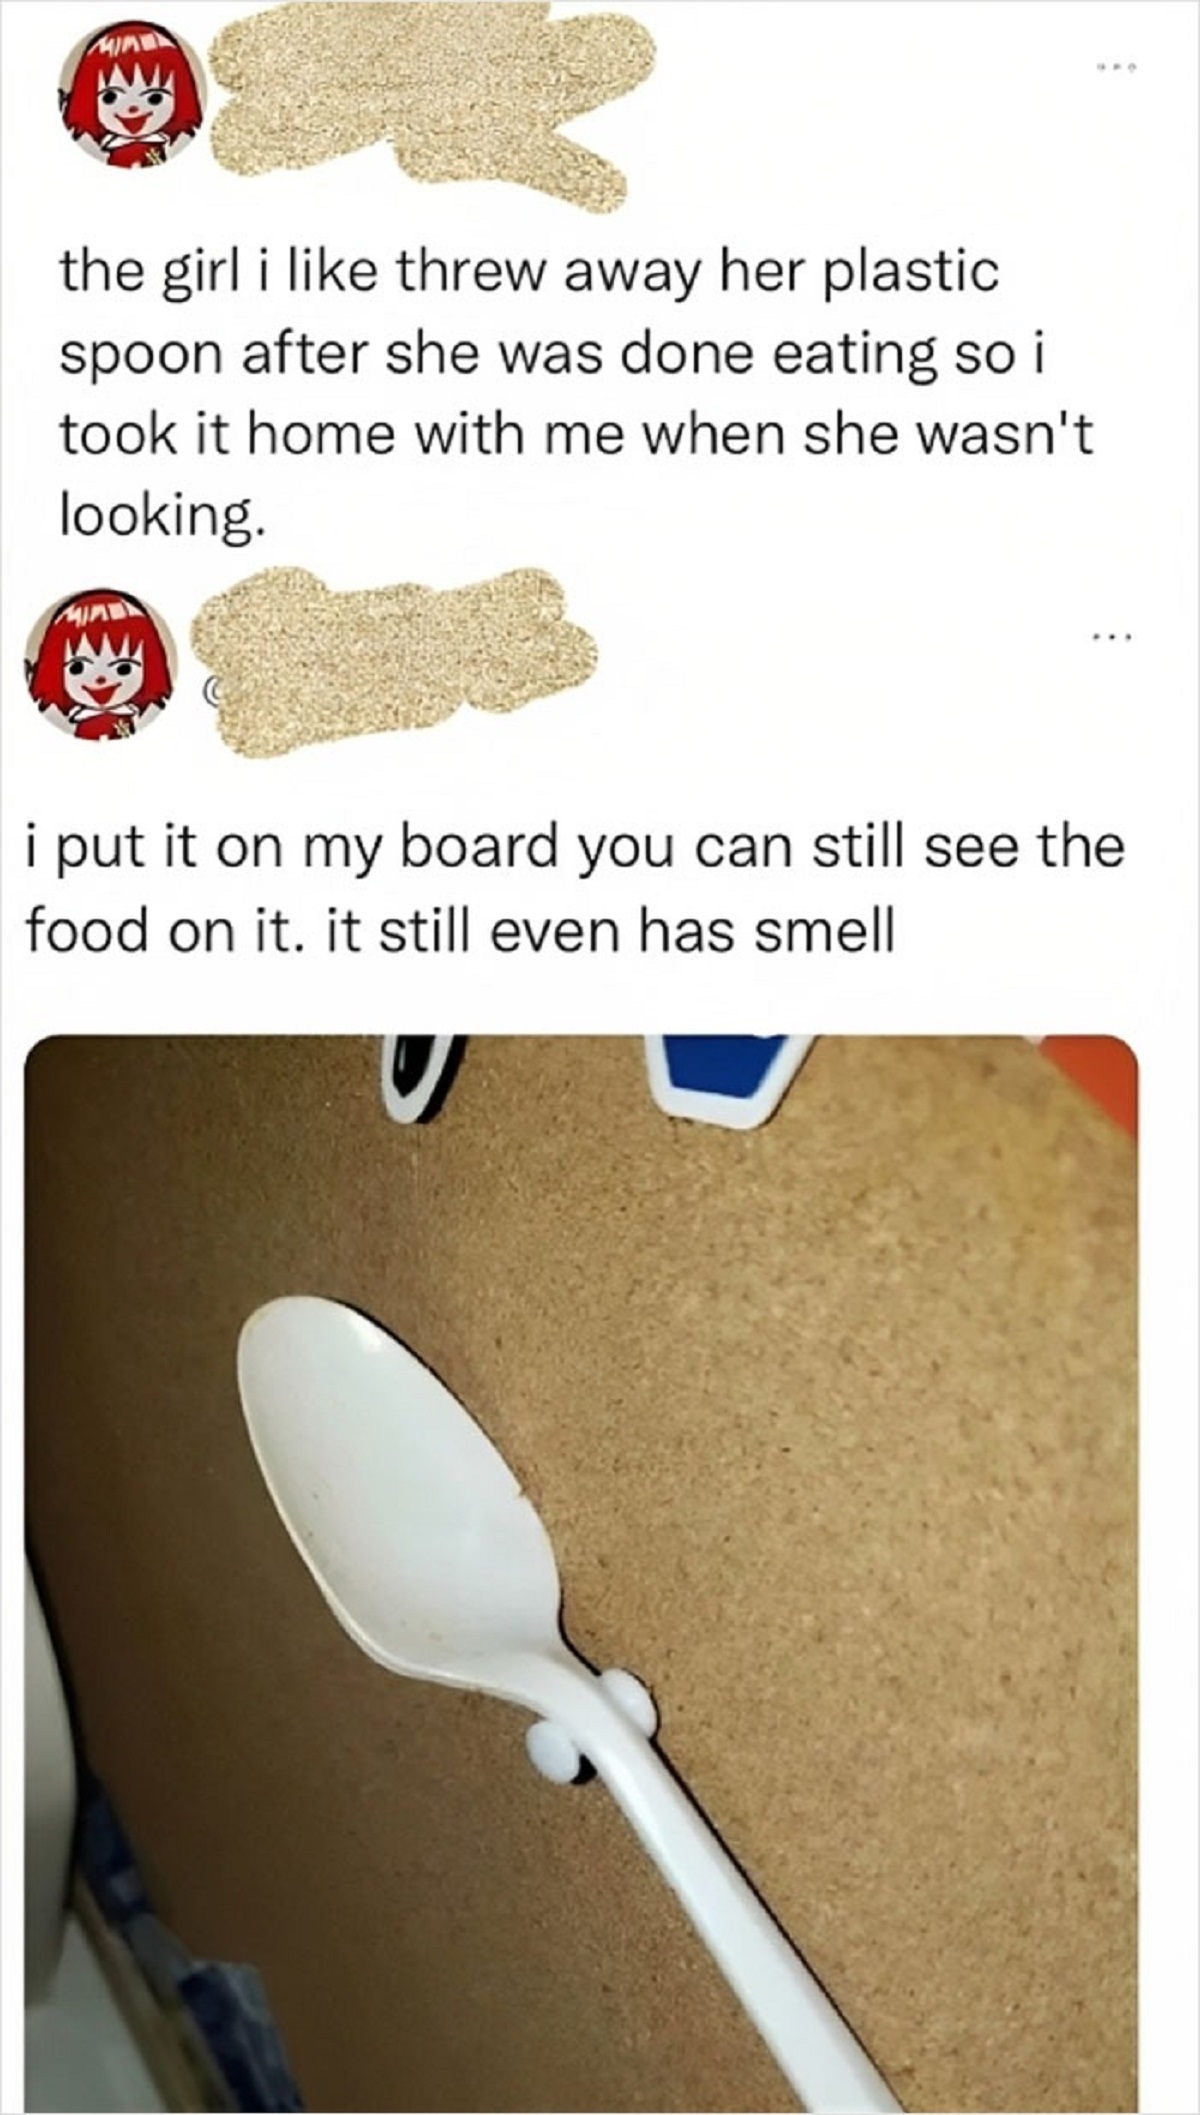 cringe pics - r cringepics - the girl i threw away her plastic spoon after she was done eating so i took it home with me when she wasn't looking. i put it on my board you can still see the food on it. it still even has smell